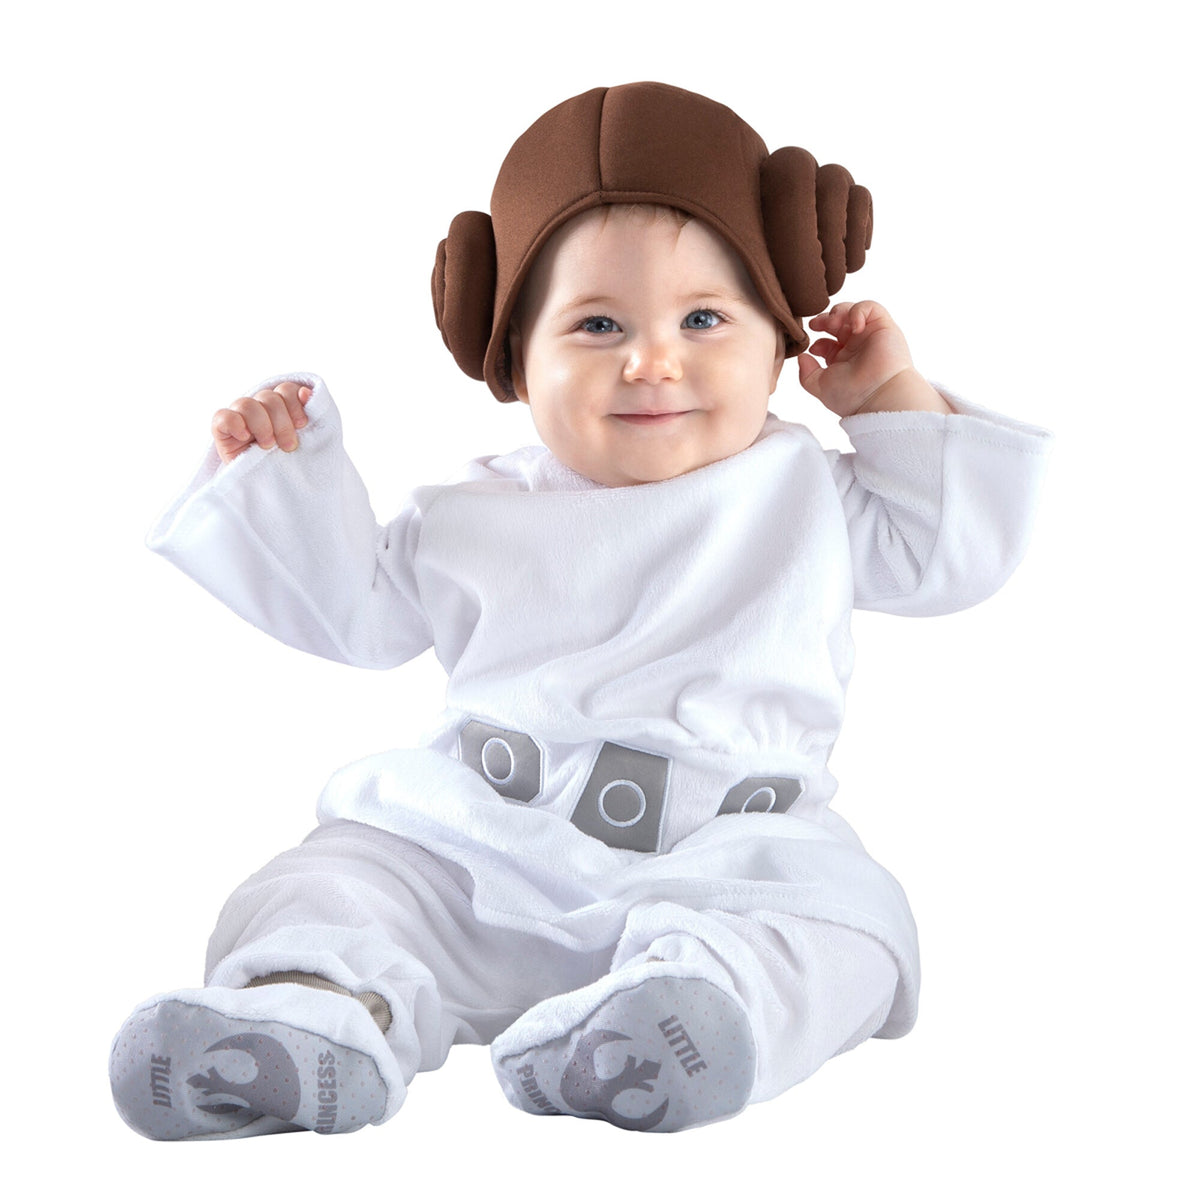 KROEGER Costumes Disney Star Wars Princess Leia Costume for Babies, White Tunic Top and Pants